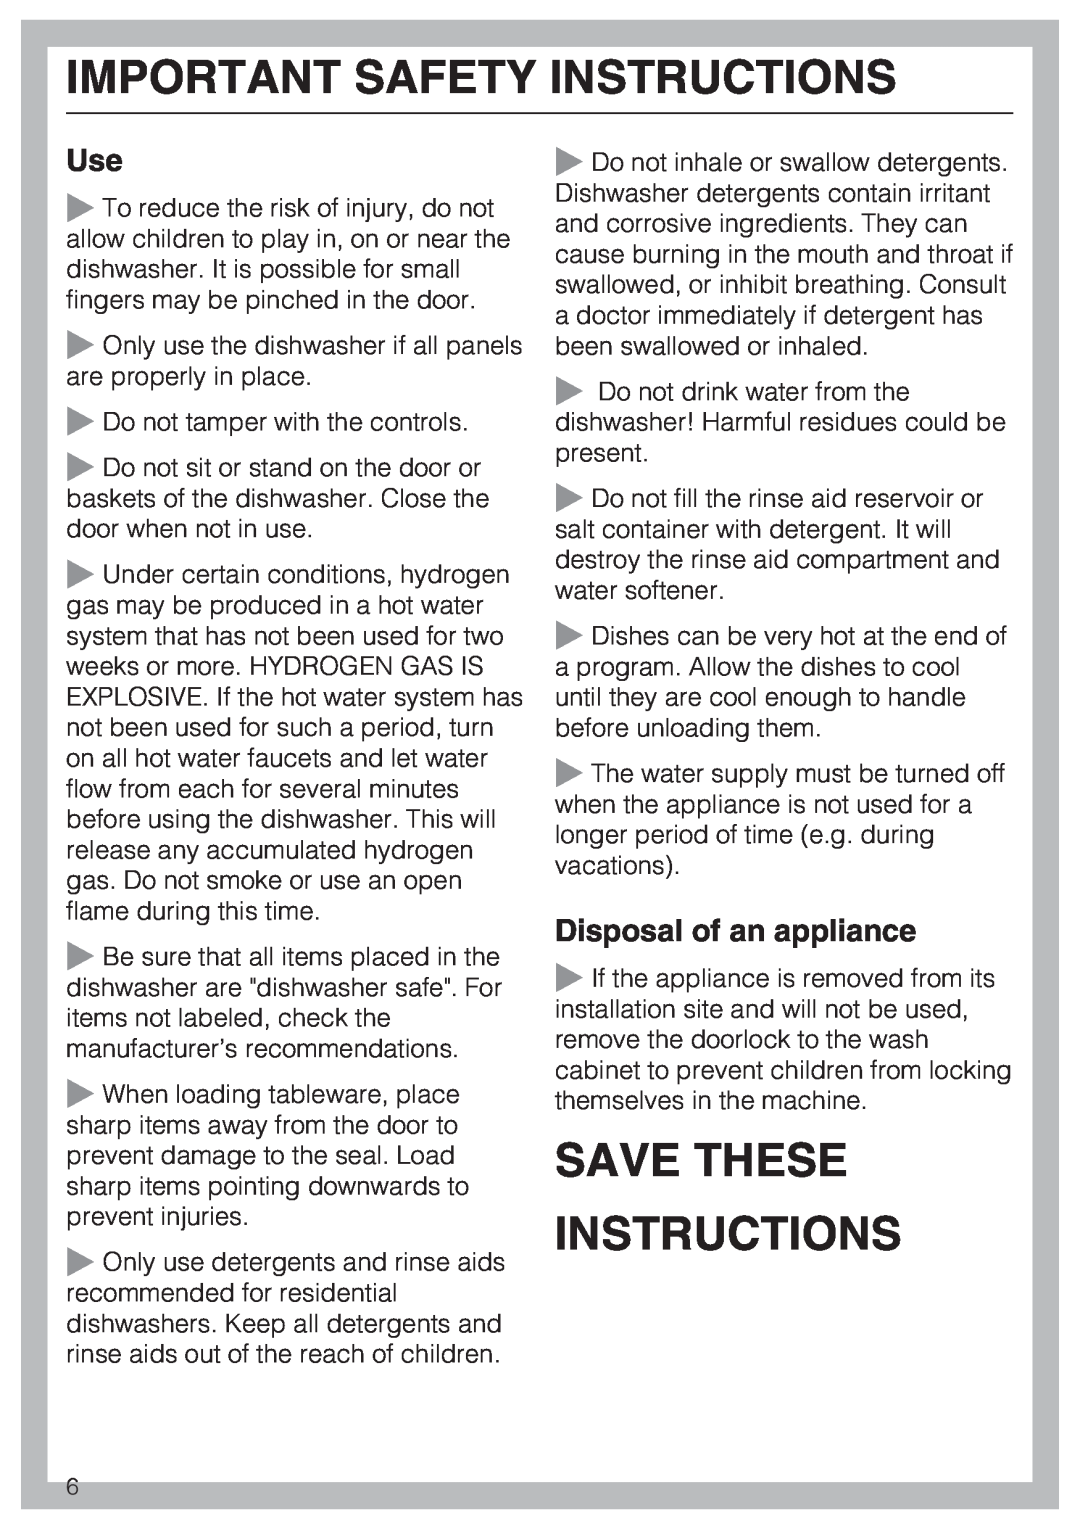 Miele G 4205 operating instructions Save These Instructions, Disposal of an appliance, Important Safety Instructions 